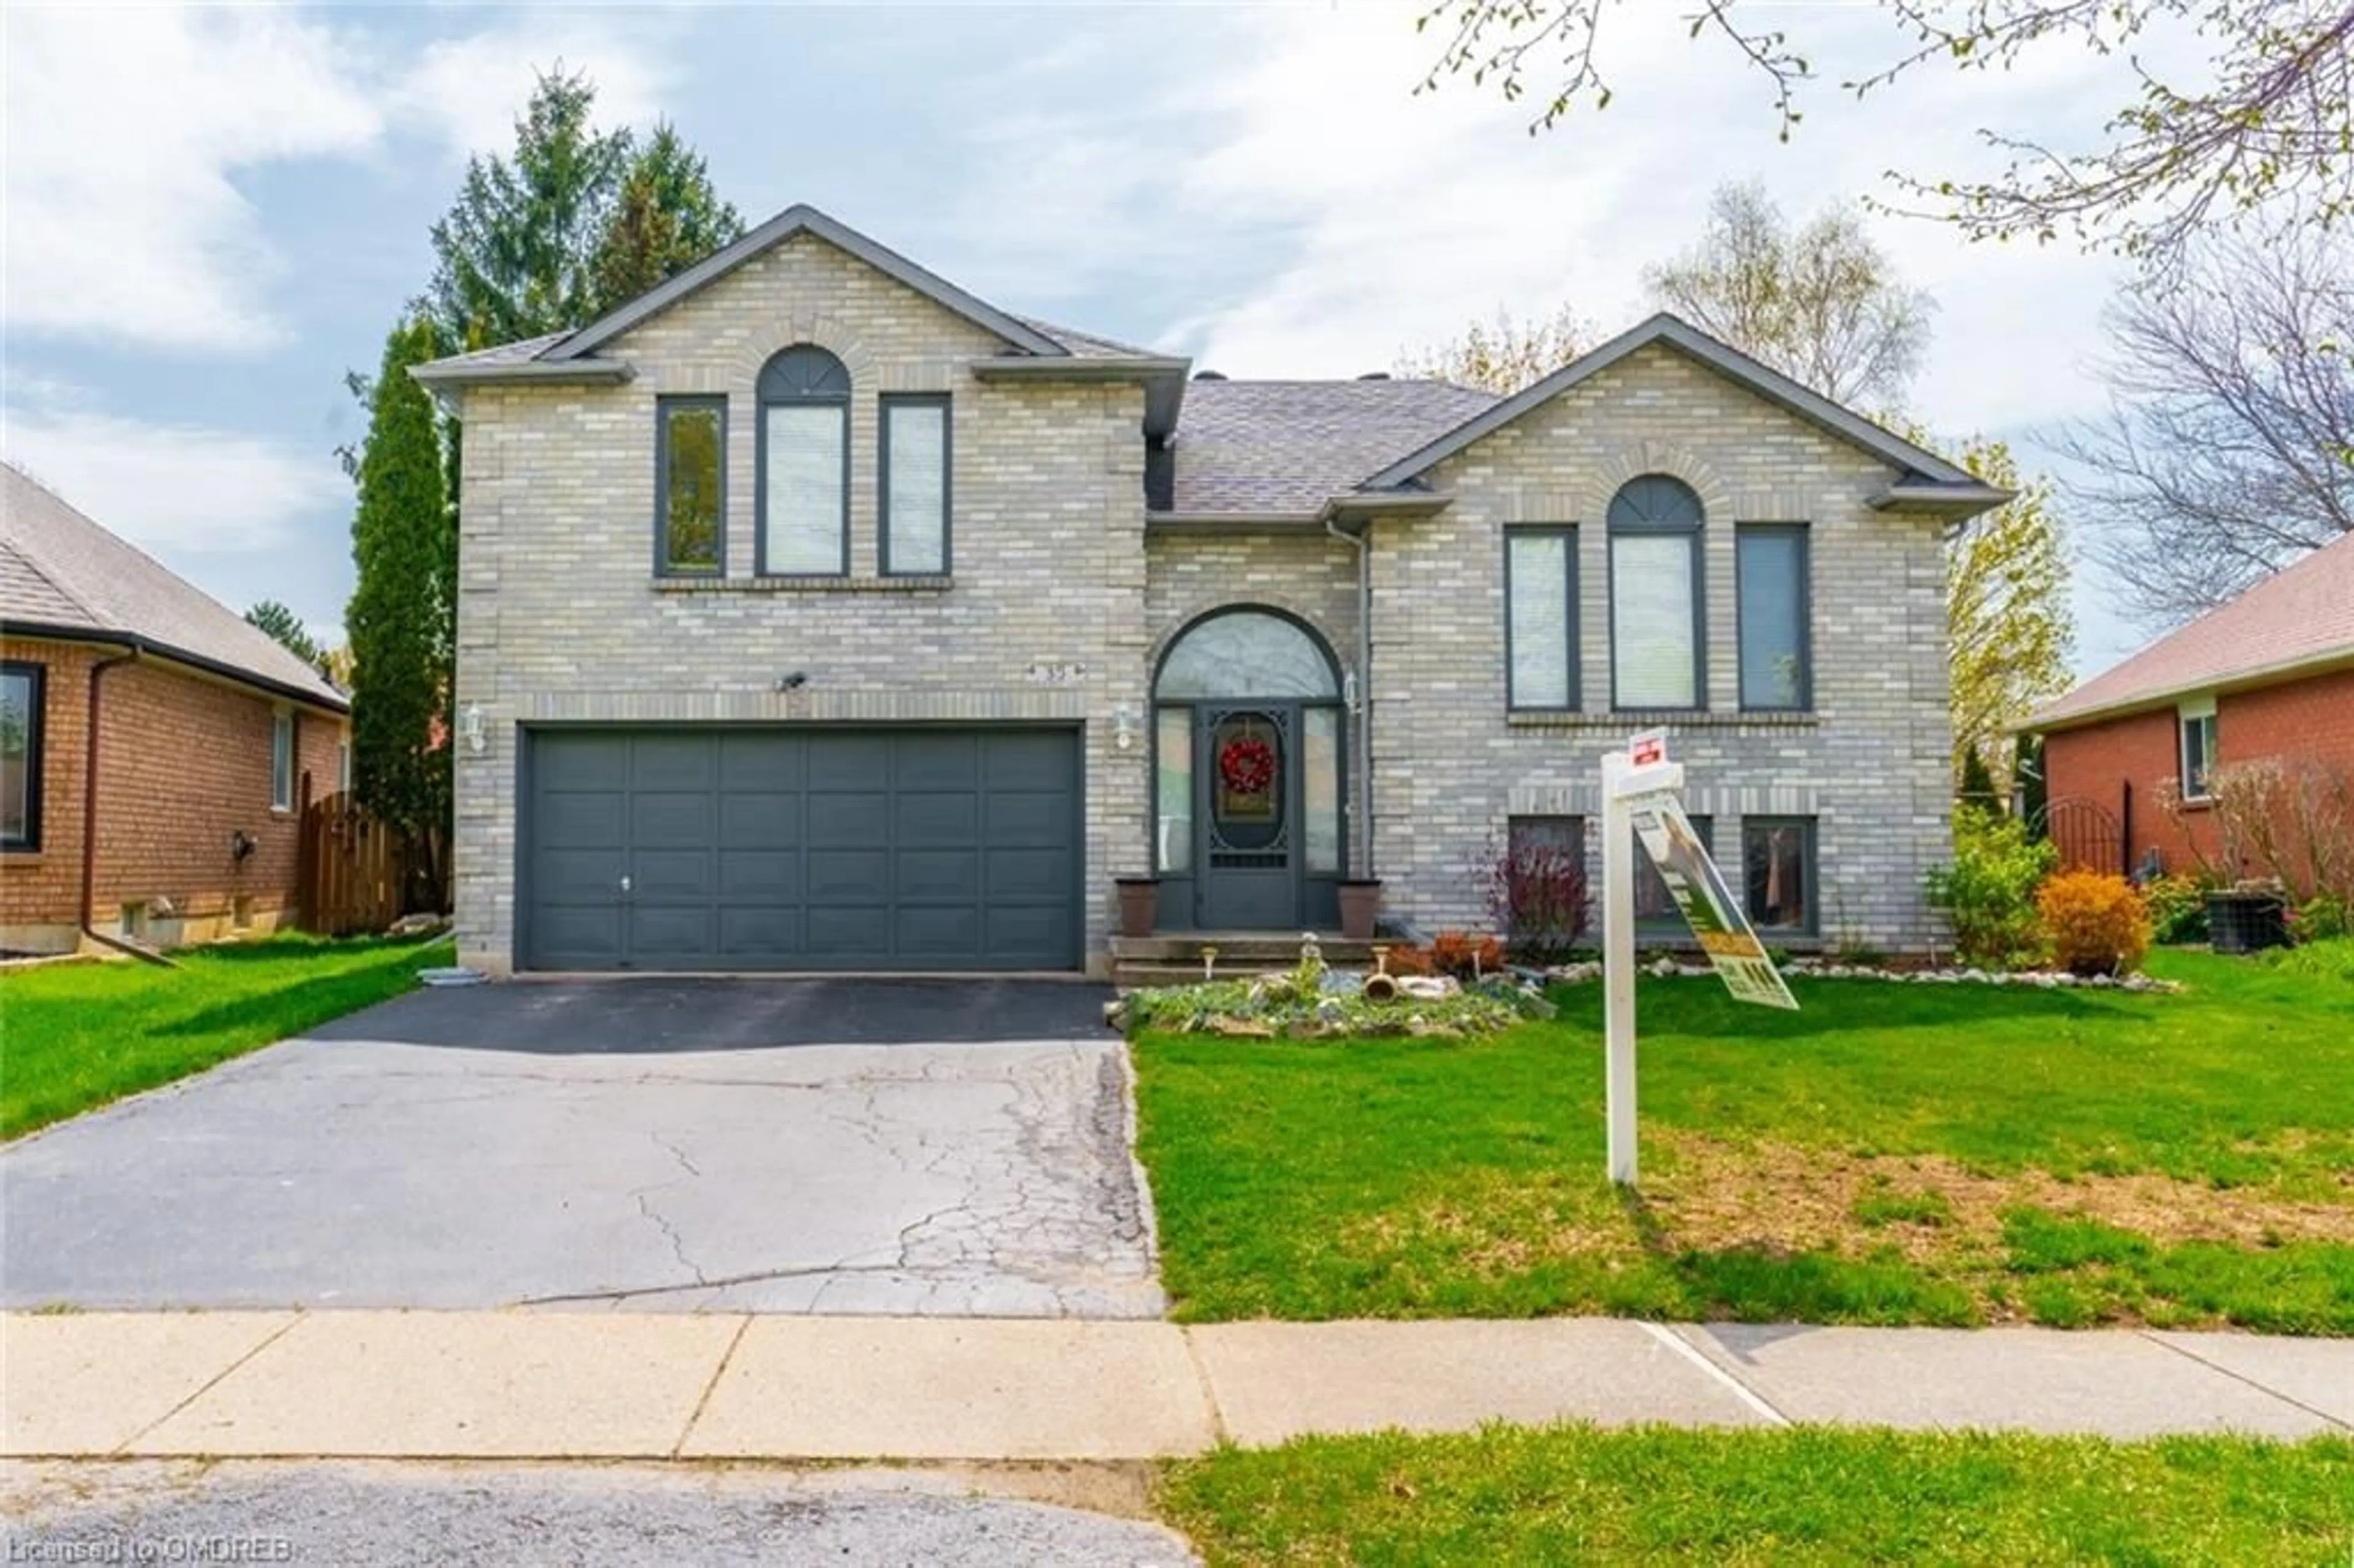 Home with brick exterior material for 35 Maplecrest Lane, Brantford Ontario N3R 7T9